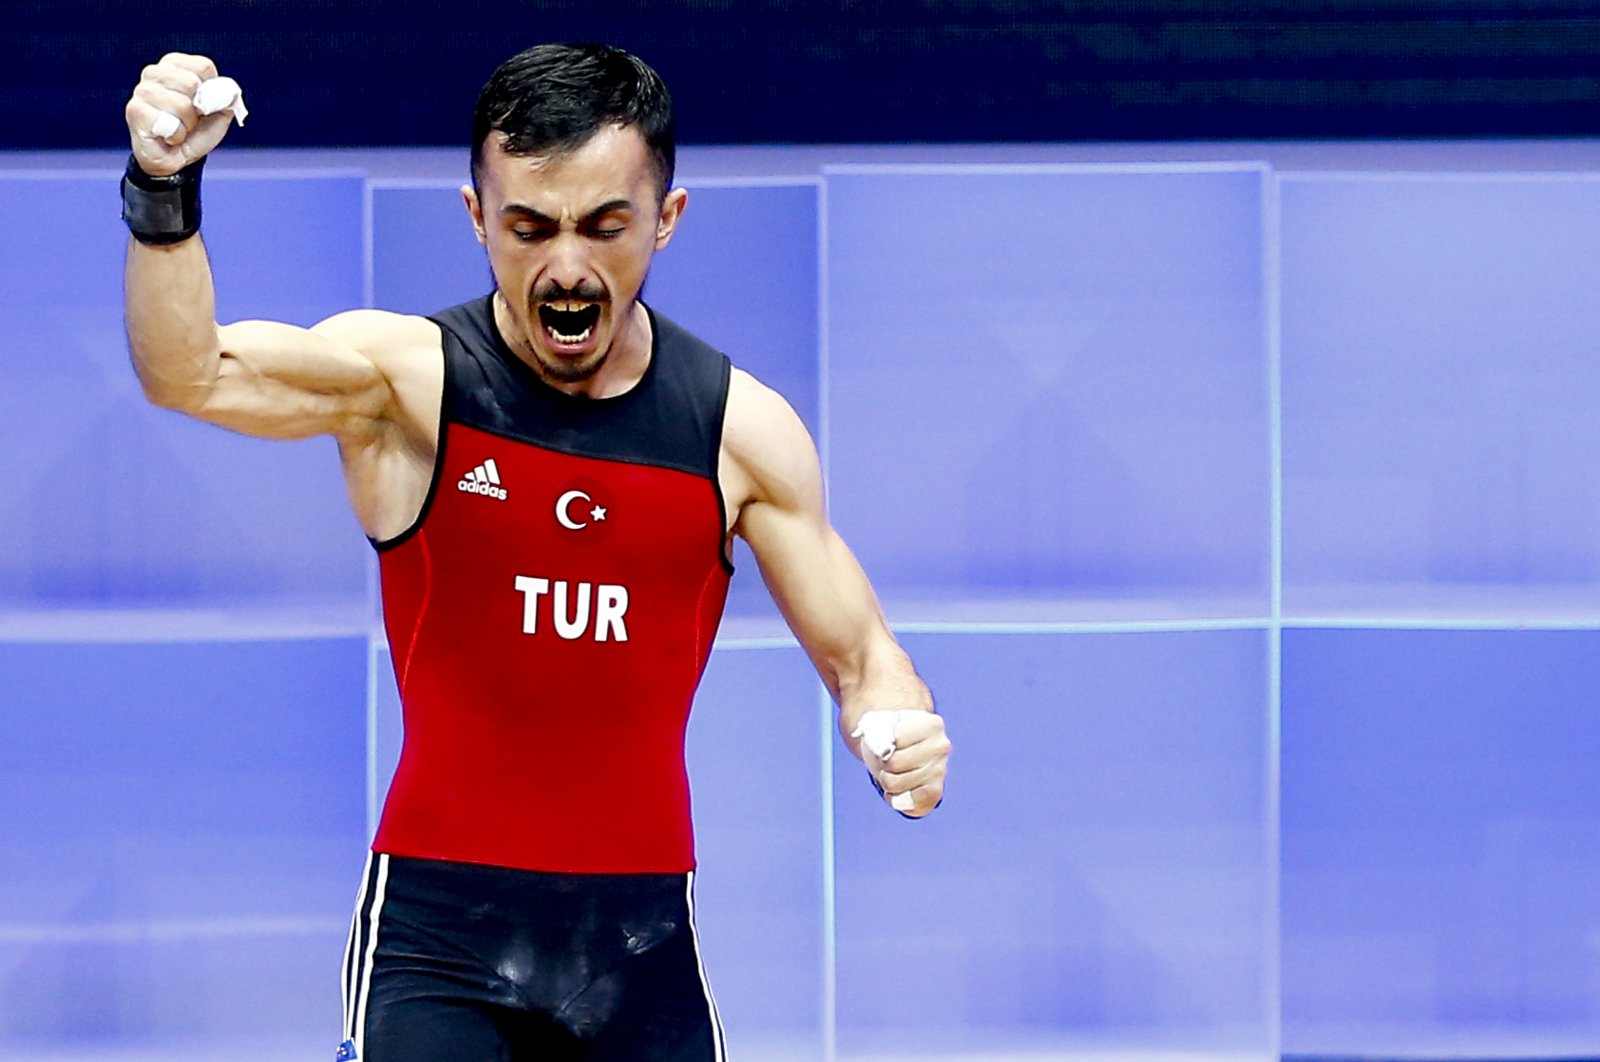 Turkey's Muammer Şahin celebrates after his turn in the men's 55-kilogram weight class final at the Weightlifting European Championships 2021 in Moscow, Russia, April 4, 2021. (AA Photo)